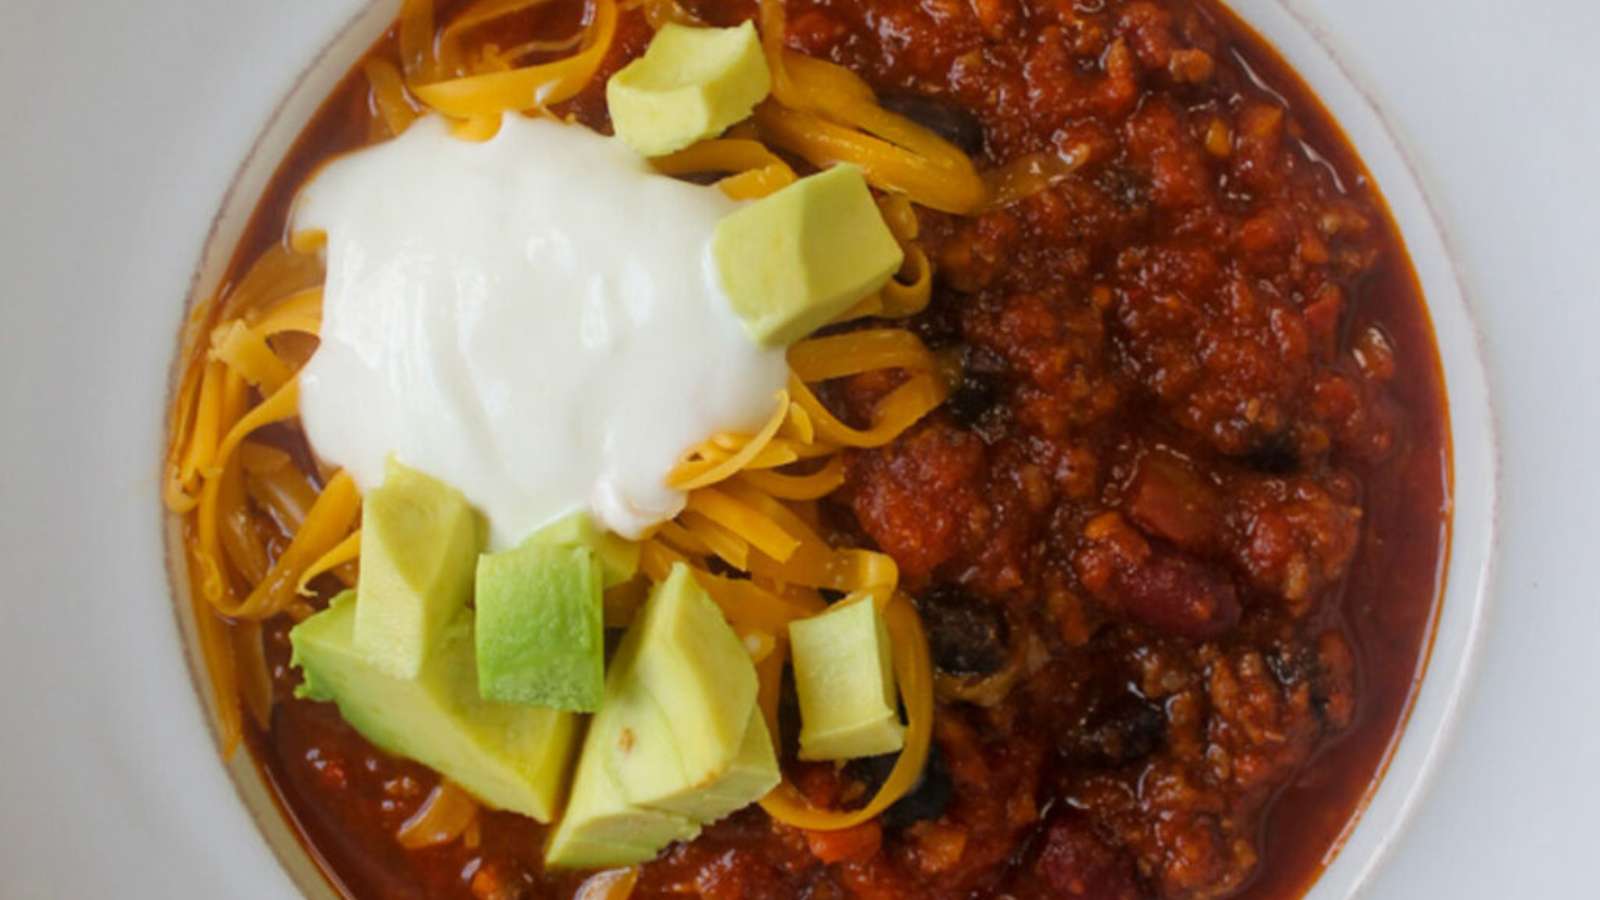 A bowl of chili with avocado and sour cream.